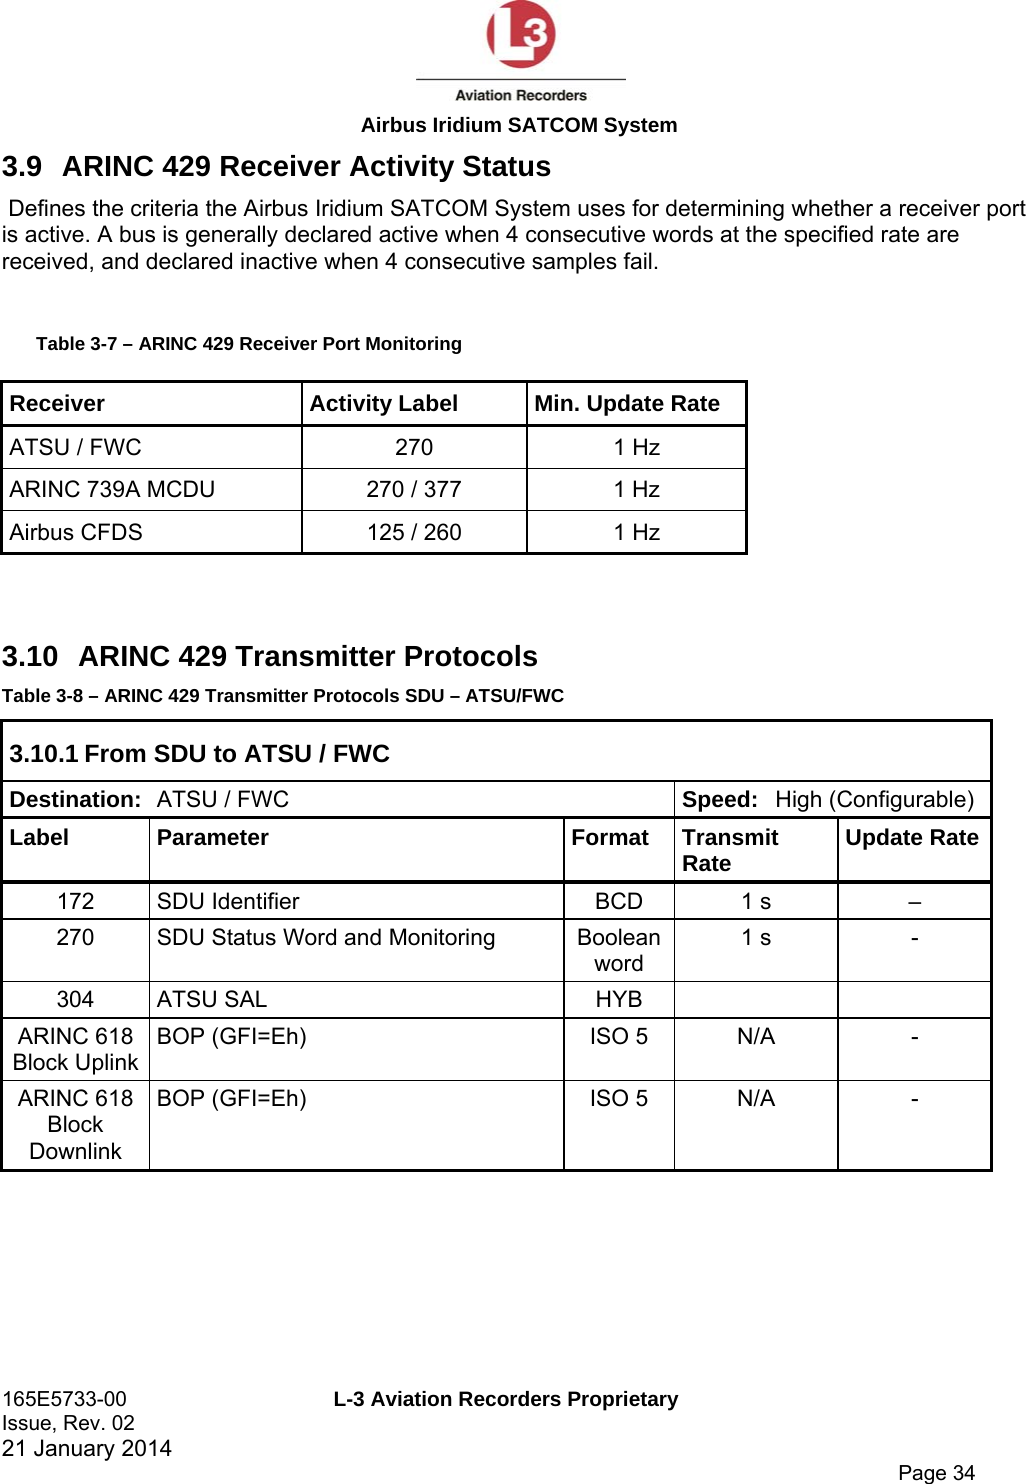  Airbus Iridium SATCOM System 165E5733-00  L-3 Aviation Recorders Proprietary Issue, Rev. 02   21 January 2014      Page 34 3.9  ARINC 429 Receiver Activity Status  Defines the criteria the Airbus Iridium SATCOM System uses for determining whether a receiver port is active. A bus is generally declared active when 4 consecutive words at the specified rate are received, and declared inactive when 4 consecutive samples fail.  Table 3-7 – ARINC 429 Receiver Port Monitoring Receiver  Activity Label  Min. Update Rate ATSU / FWC  270  1 Hz ARINC 739A MCDU  270 / 377  1 Hz Airbus CFDS  125 / 260  1 Hz  3.10   ARINC 429 Transmitter Protocols Table 3-8 – ARINC 429 Transmitter Protocols SDU – ATSU/FWC 3.10.1 From SDU to ATSU / FWC Destination:  ATSU / FWC  Speed: High (Configurable) Label Parameter  Format Transmit Rate  Update Rate172  SDU Identifier  BCD  1 s  – 270  SDU Status Word and Monitoring  Boolean word 1 s  - 304 ATSU SAL  HYB     ARINC 618 Block Uplink BOP (GFI=Eh)  ISO 5  N/A  - ARINC 618 Block Downlink BOP (GFI=Eh)  ISO 5  N/A  -      